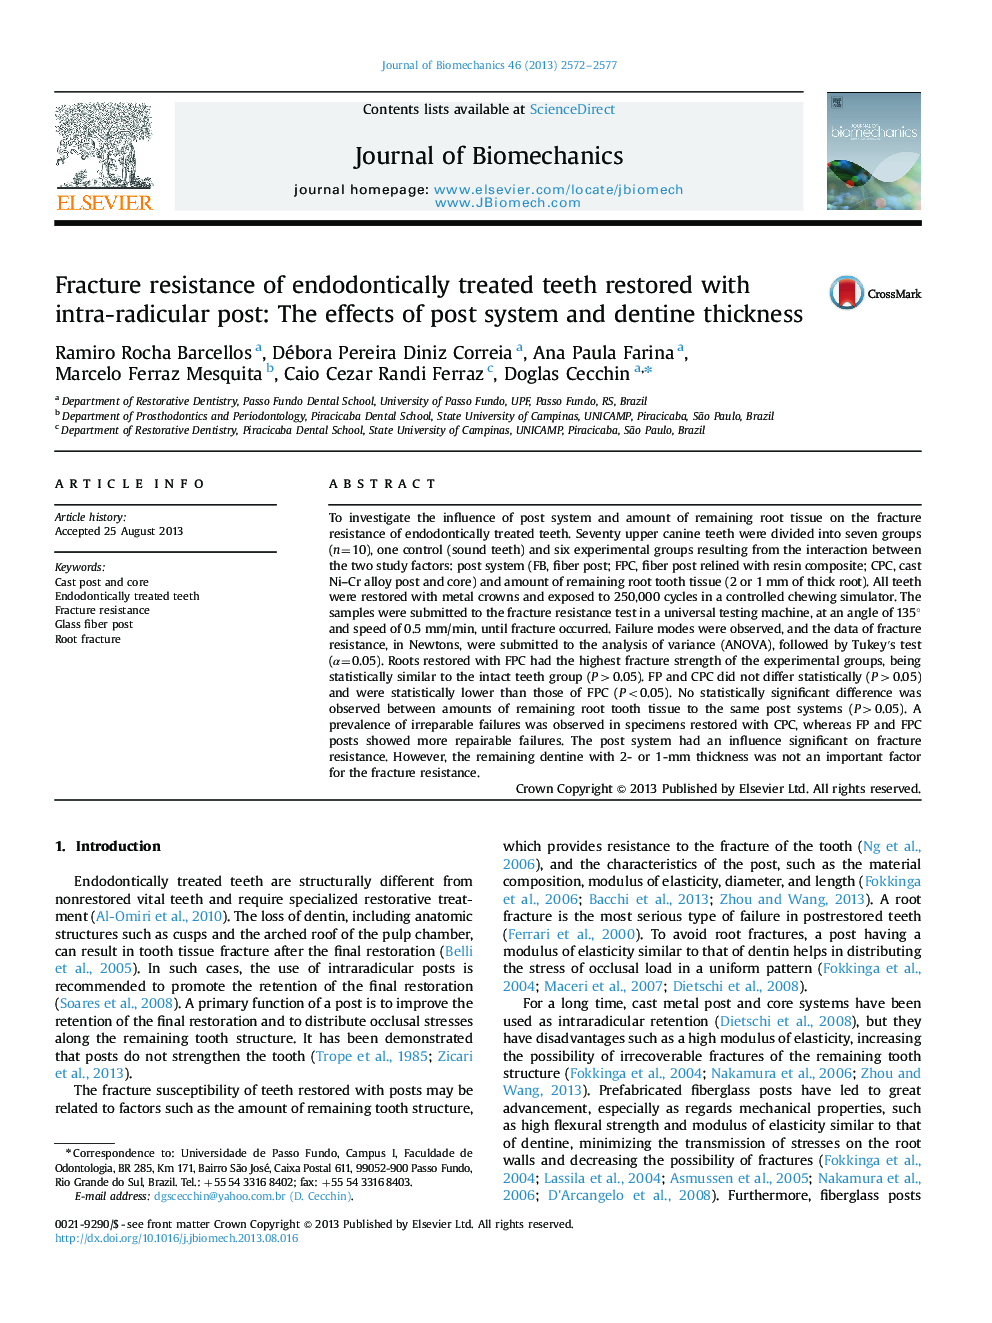 Fracture resistance of endodontically treated teeth restored with intra-radicular post: The effects of post system and dentine thickness